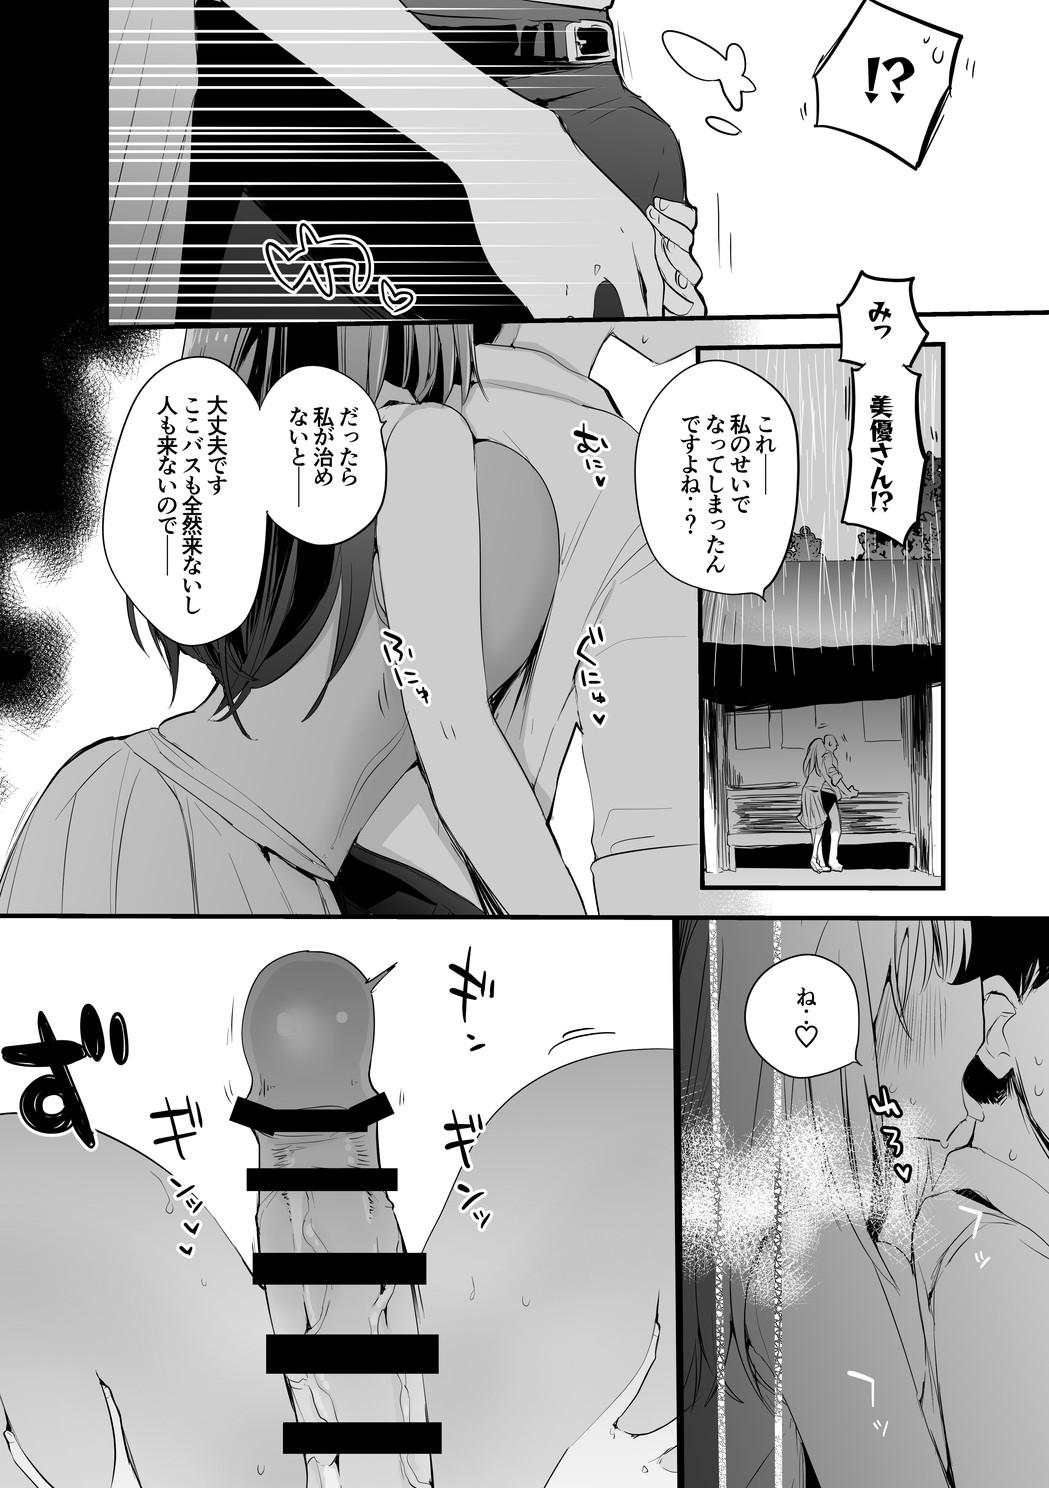 Tanned 美優さんと雨編 Students - Page 3